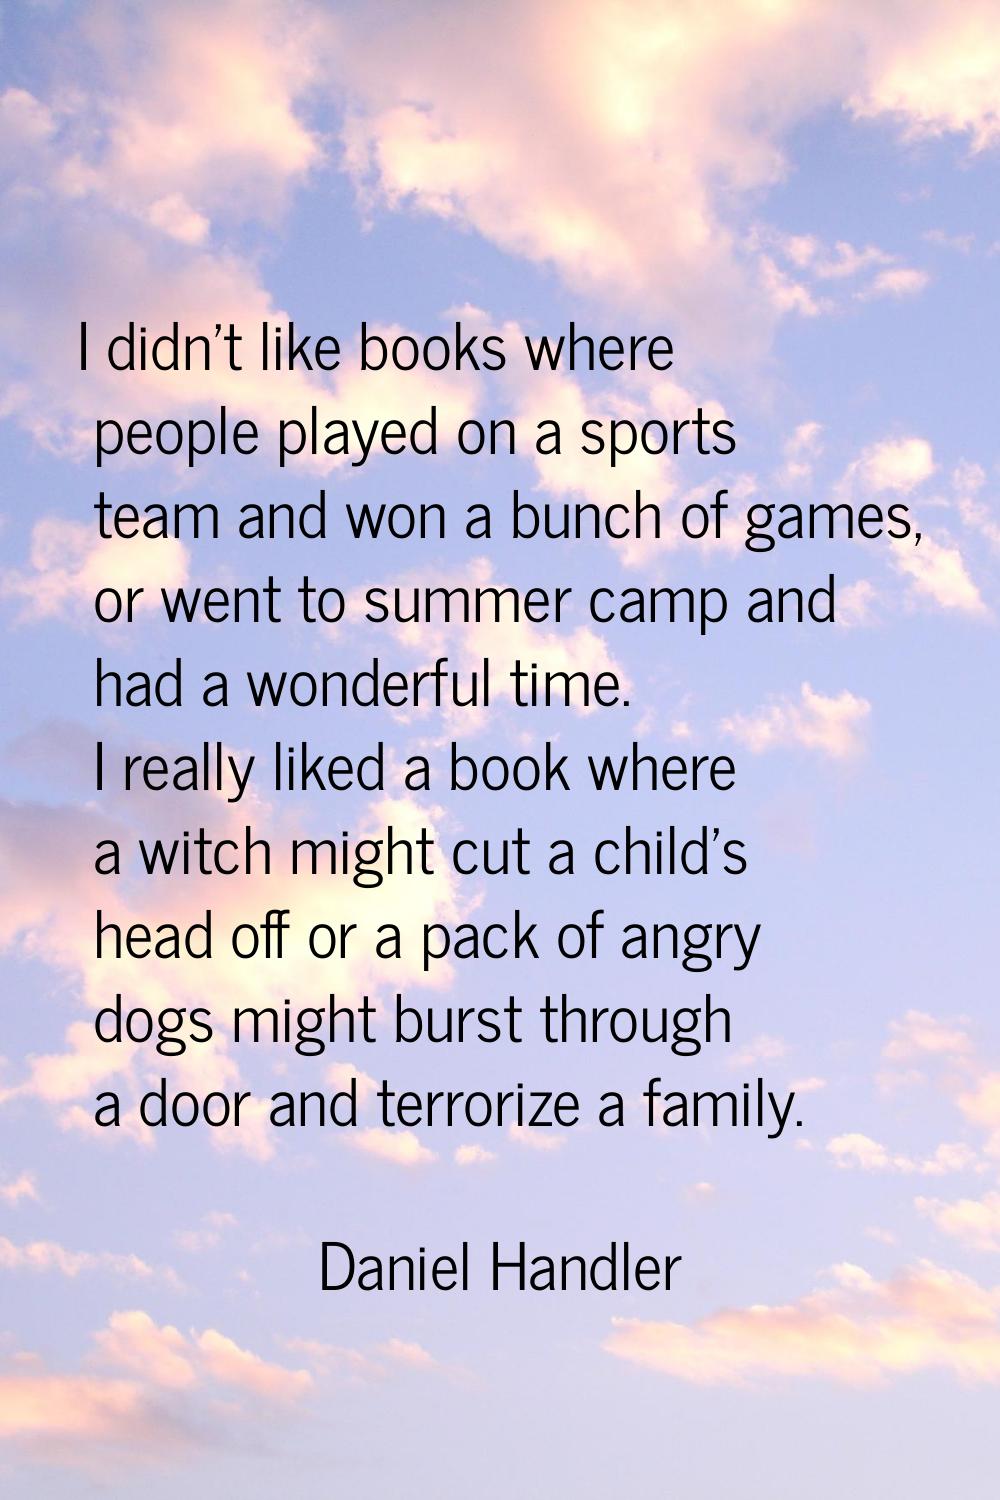 I didn't like books where people played on a sports team and won a bunch of games, or went to summe